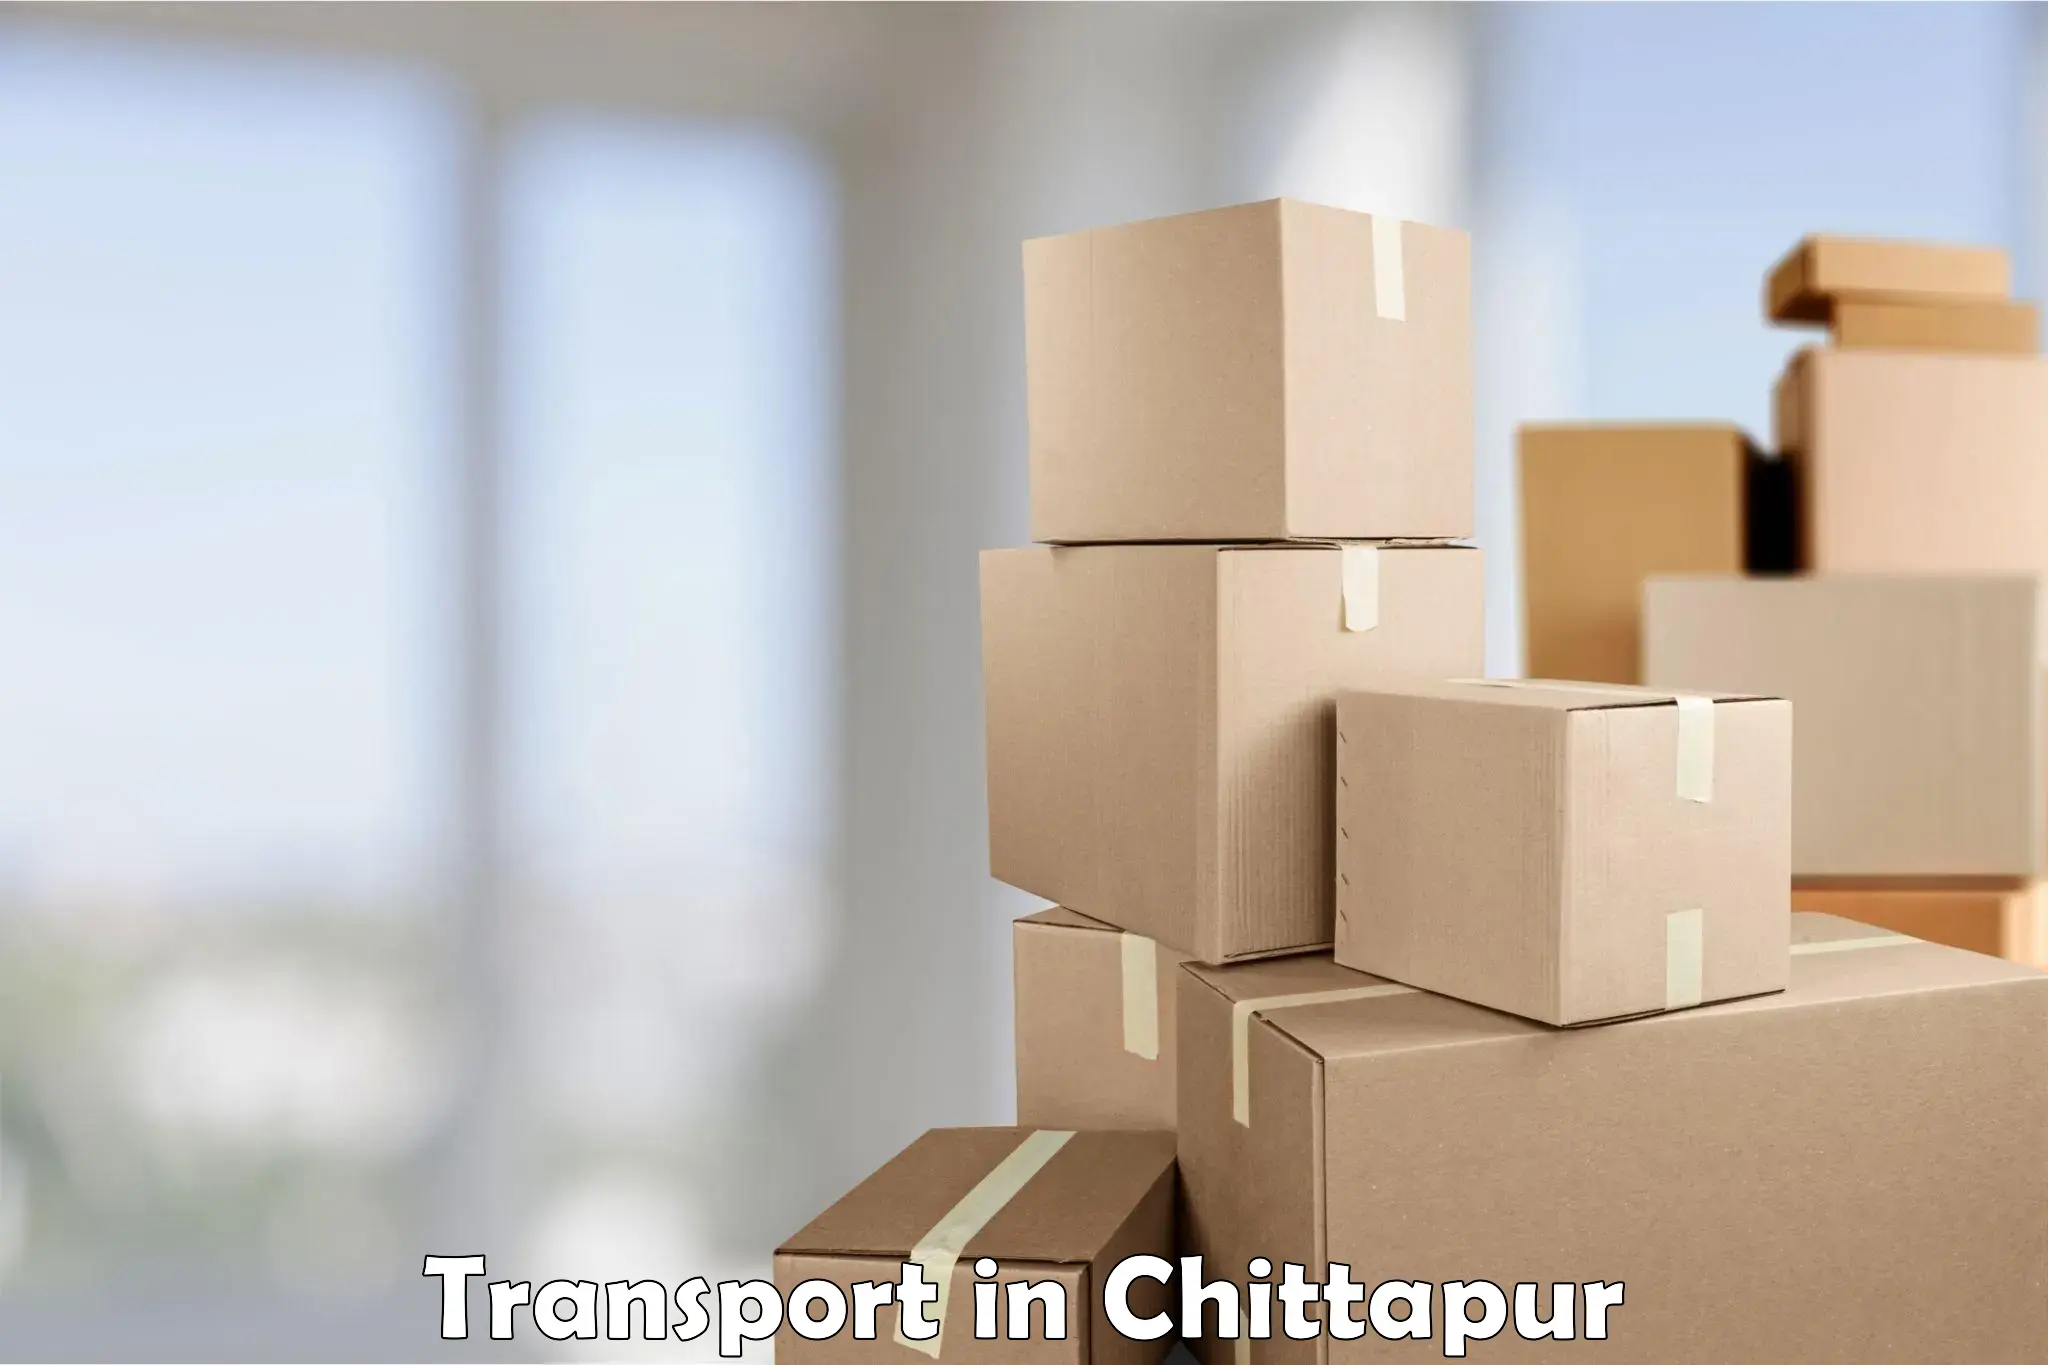 Daily parcel service transport in Chittapur